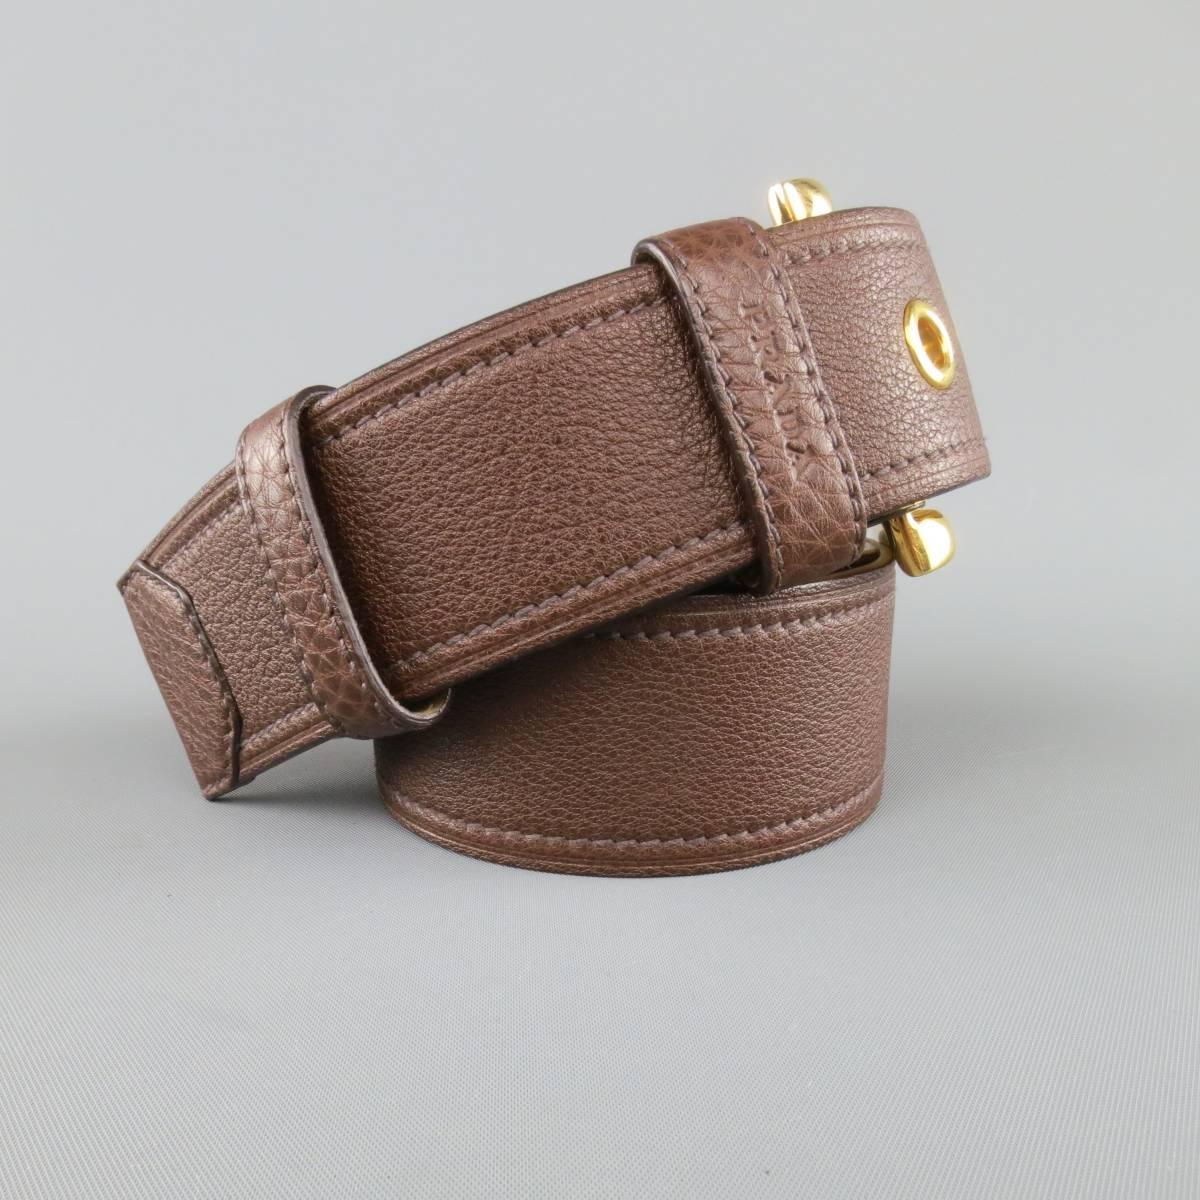 This PRADA belt features a rich brown textured leather strap with gold tone buckle and grommets. Made in Italy.
 
Excellent Pre-Owned Condition.
Marked: 32/80
 
Length: 41 in.
Width: 1.65 in.
Fits: 30-34 in.
Buckle: 2.5 x 2.45 in.
